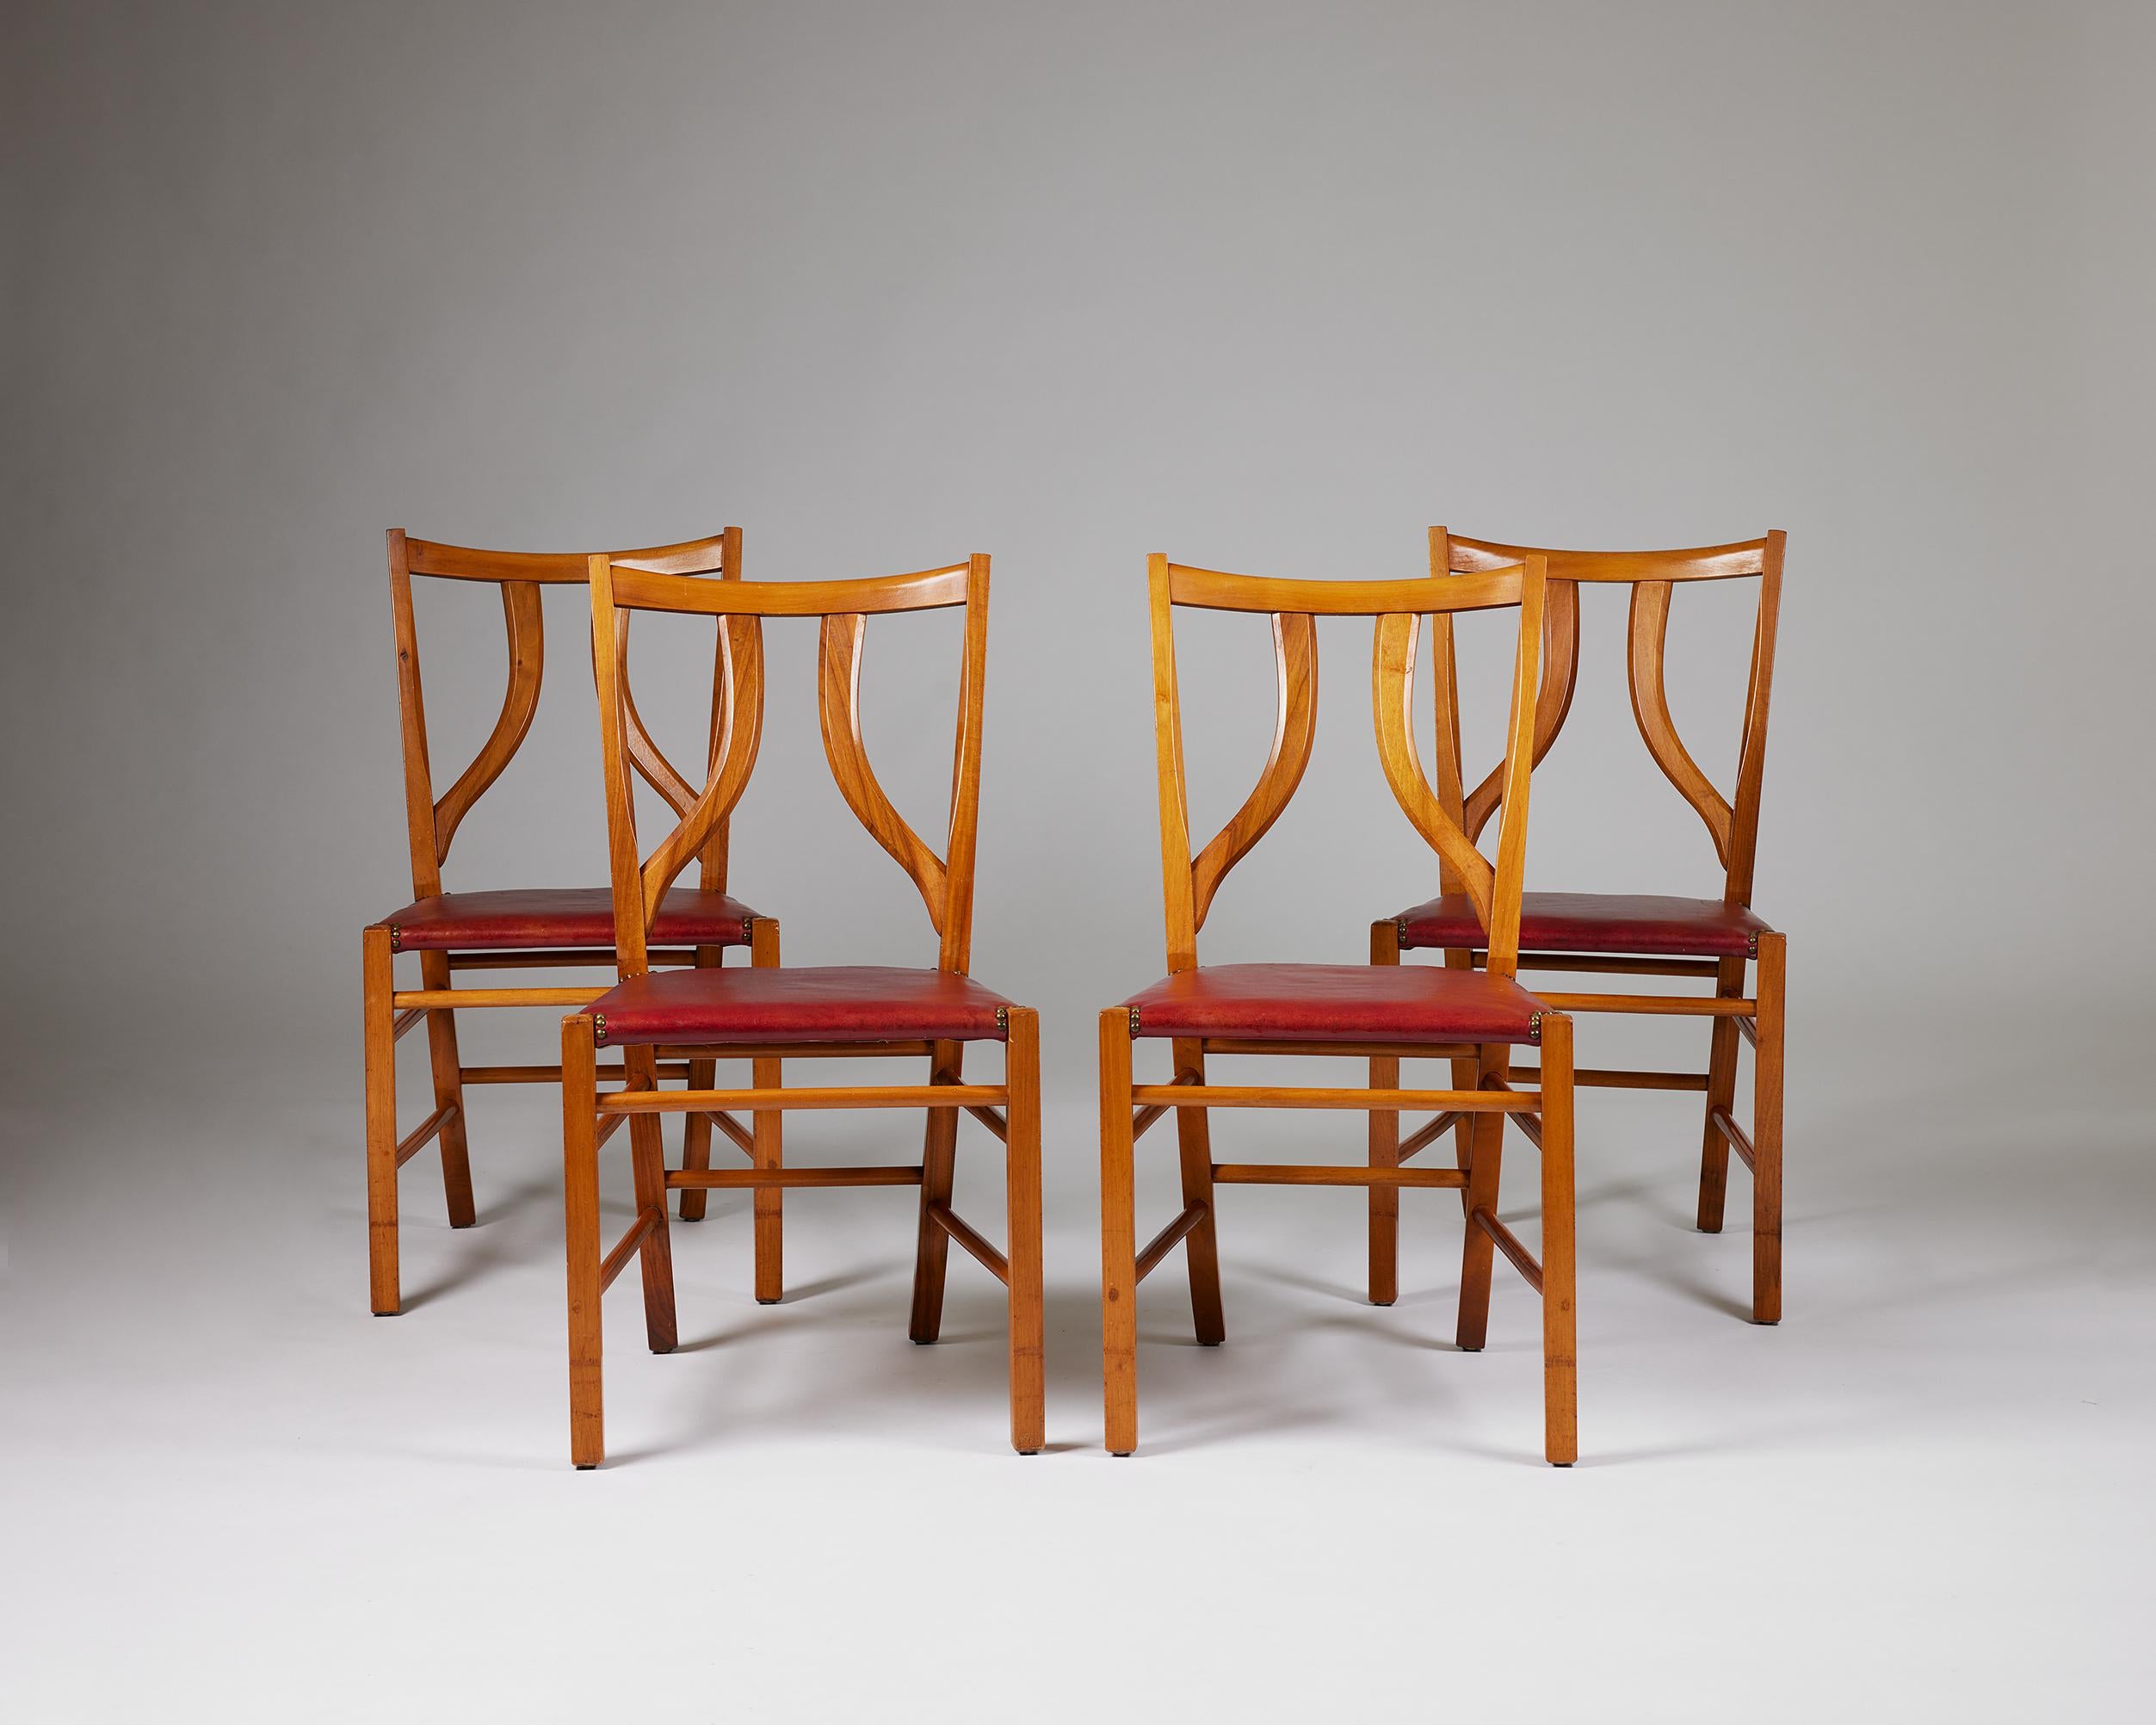 Set of four dining chairs model 2027 designed by Josef Frank for Svenskt Tenn.
Sweden, 1950s.

Mahogany and leather.

Together with Estrid Ericson and her furnishing company, Svenskt Tenn, Josef Frank developed his characteristic style combining